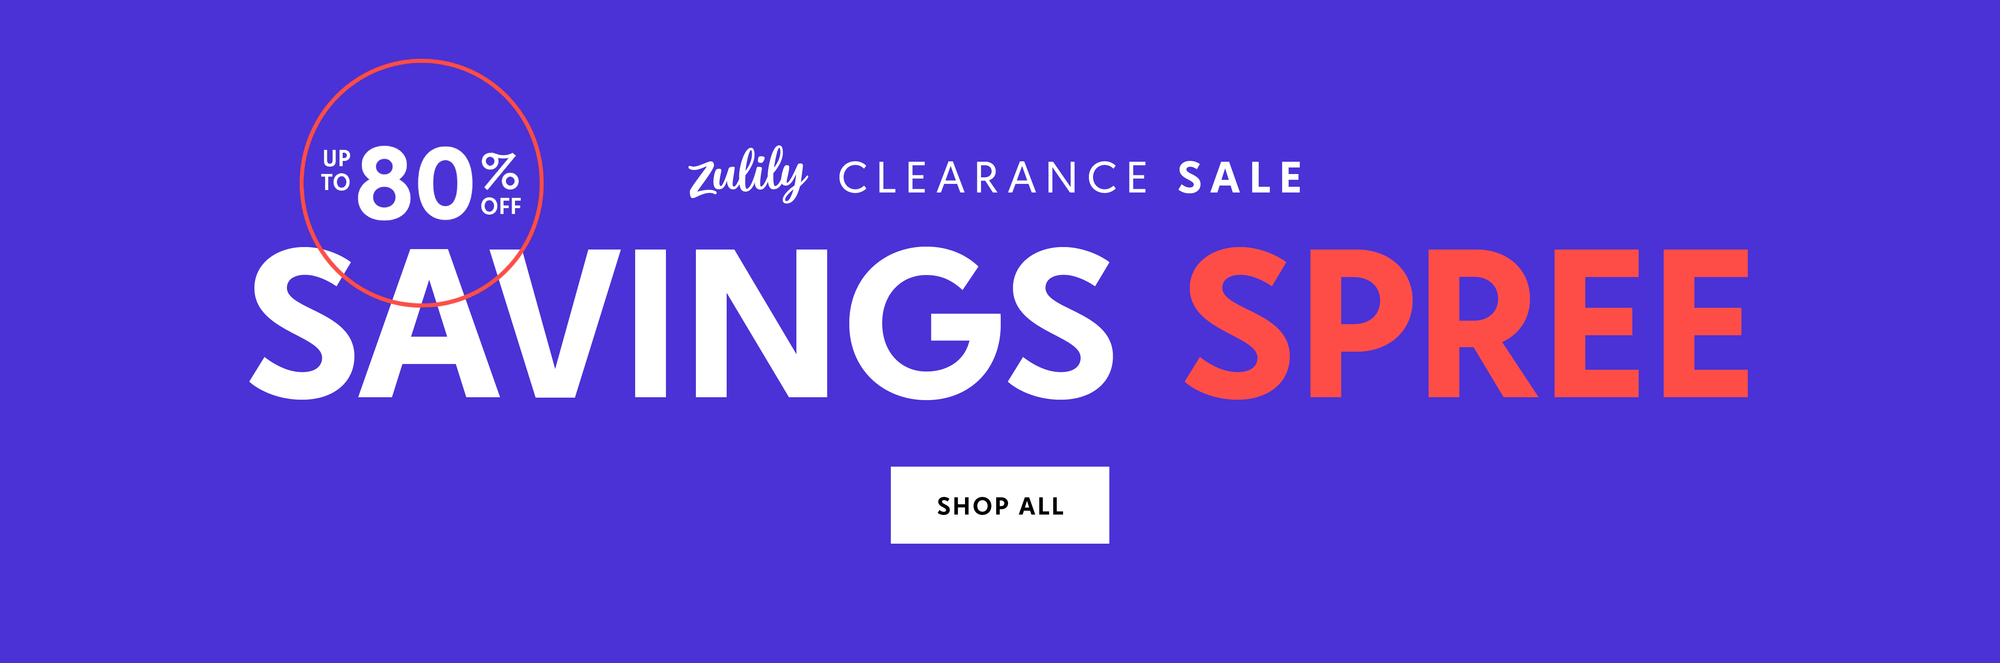 Up to 80% off. Zulily clearance sale. Savings Spree. Shop all